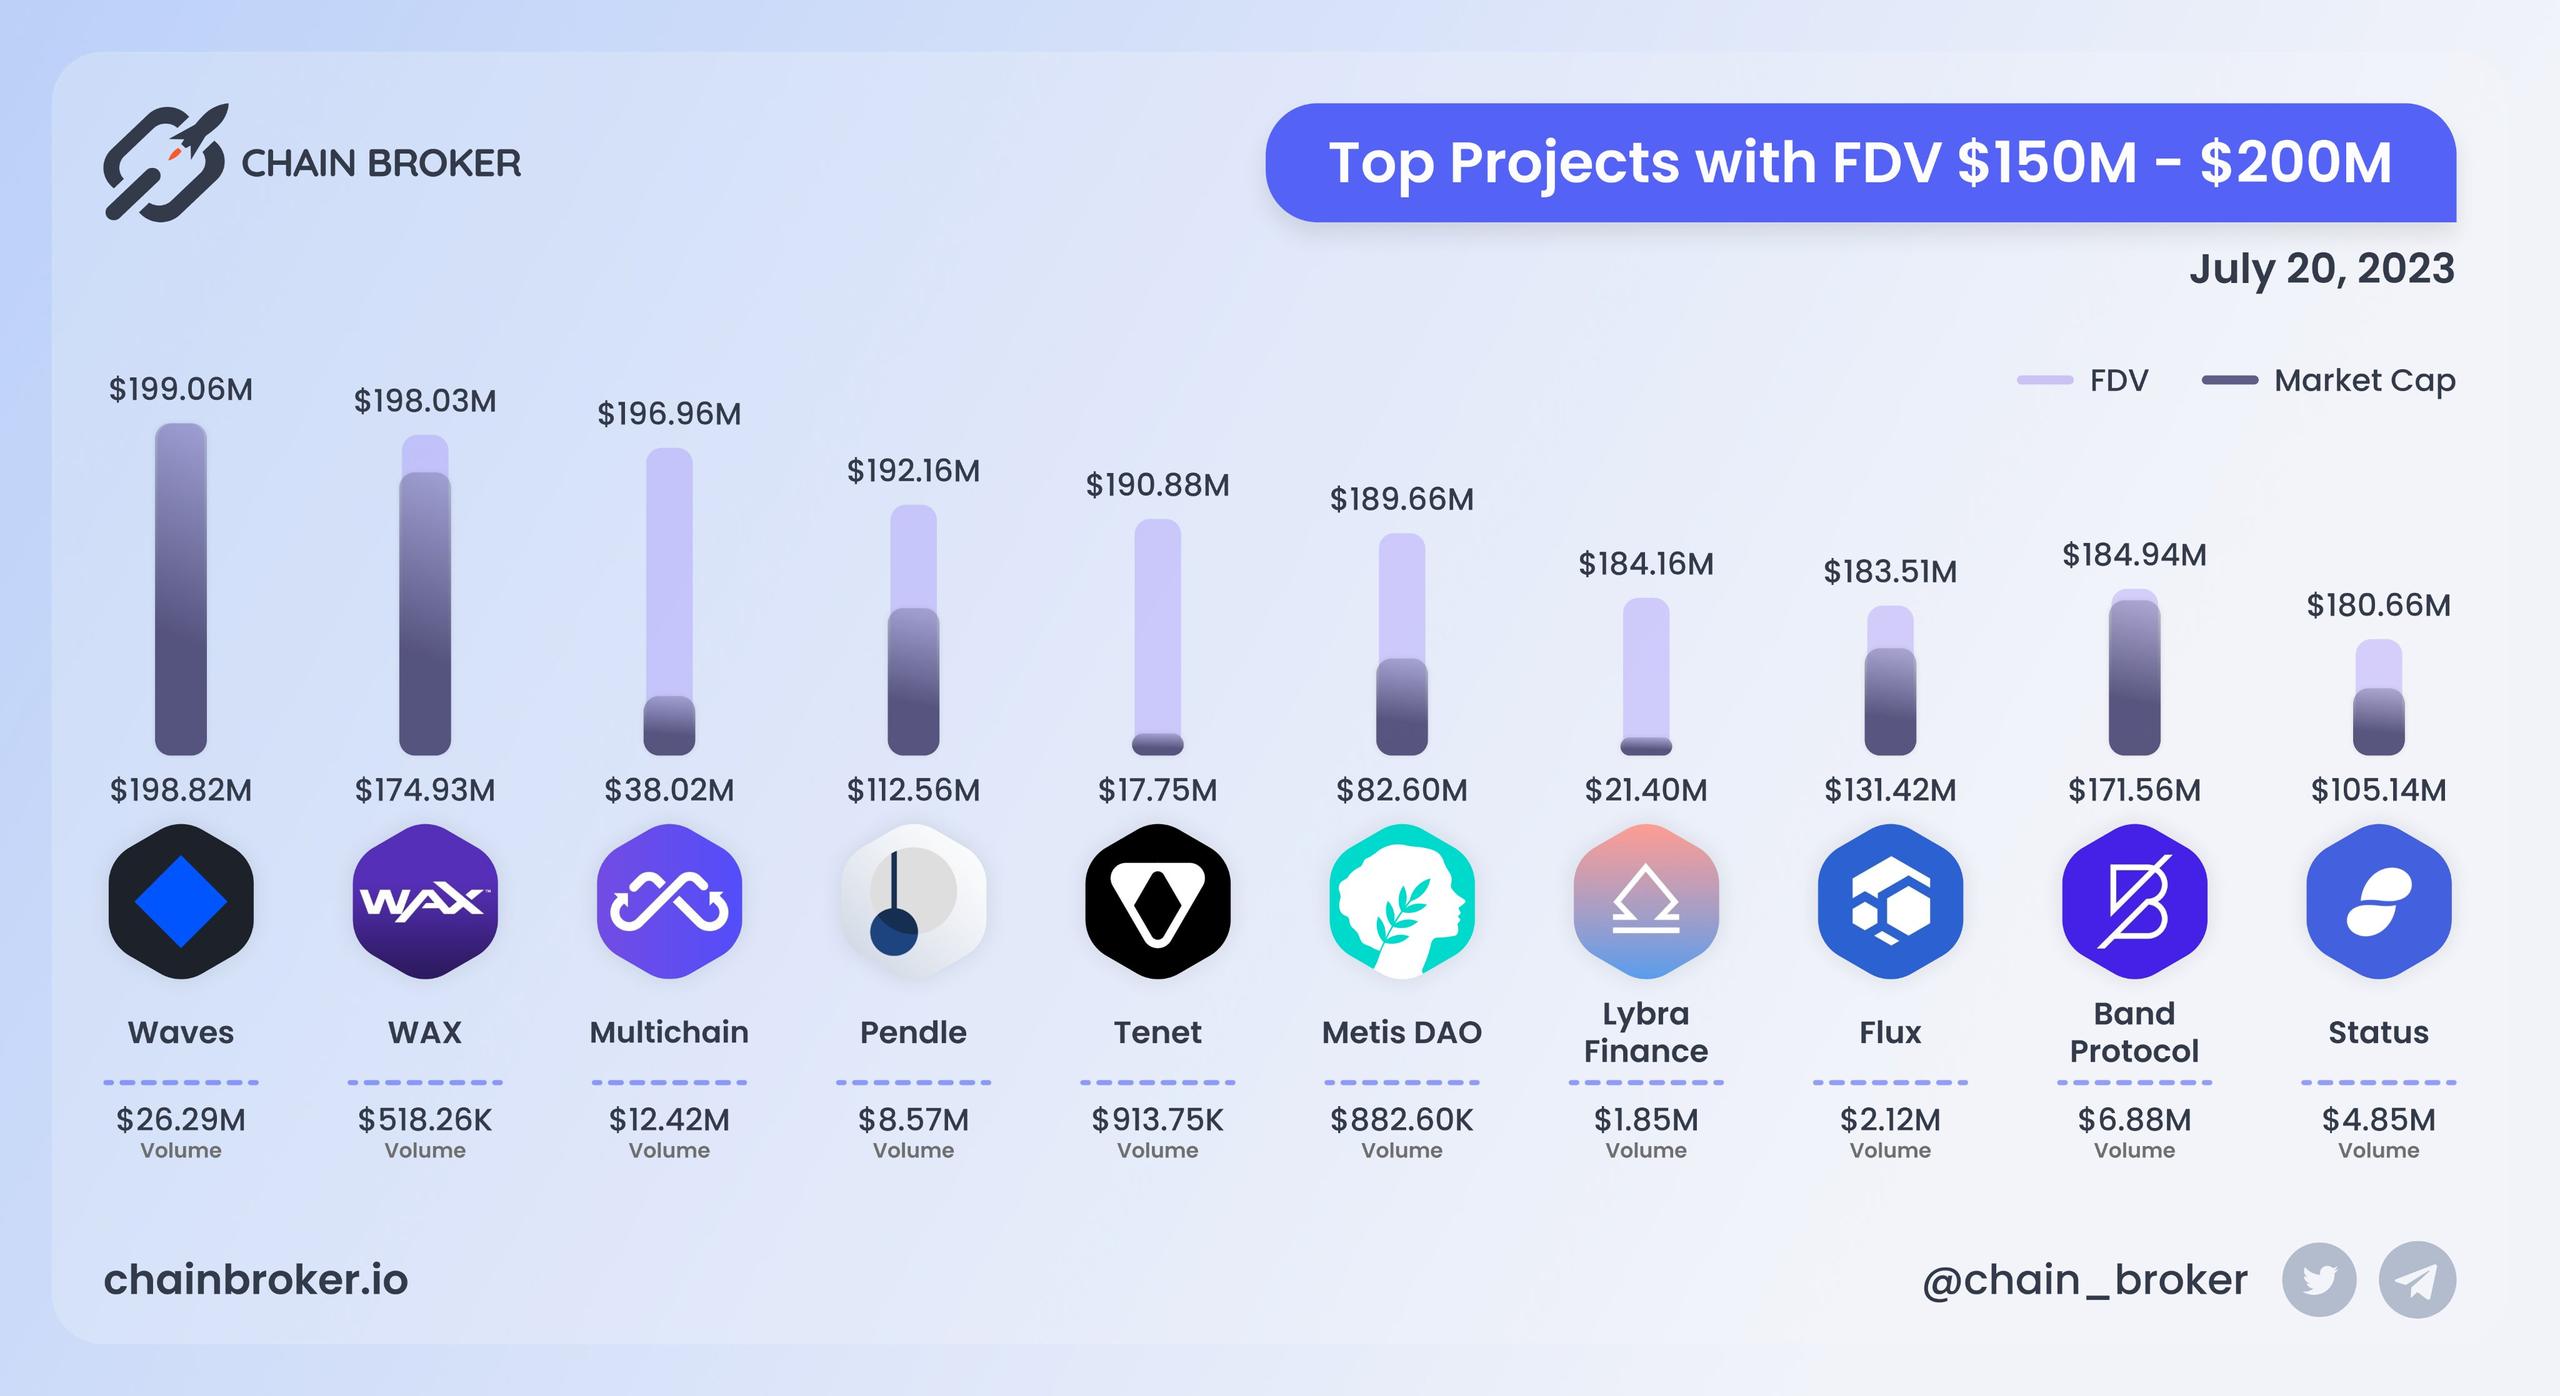 Top projects with FDV $150M - $200M